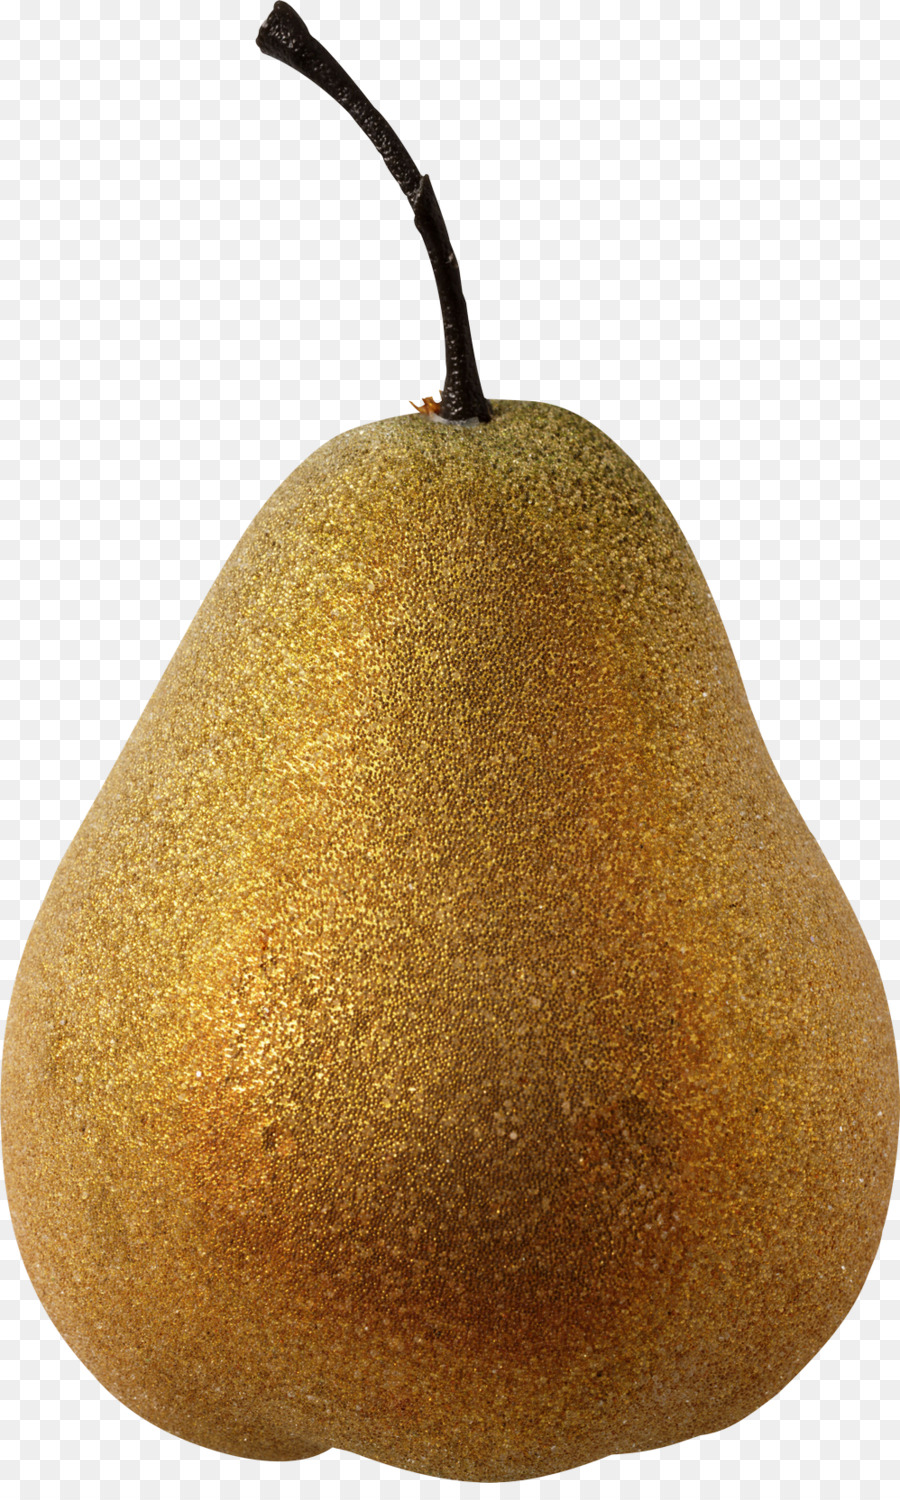 Portable Network Graphics Pear Image Transparency - pear png download - 998*1645 - Free Transparent Pear png Download.